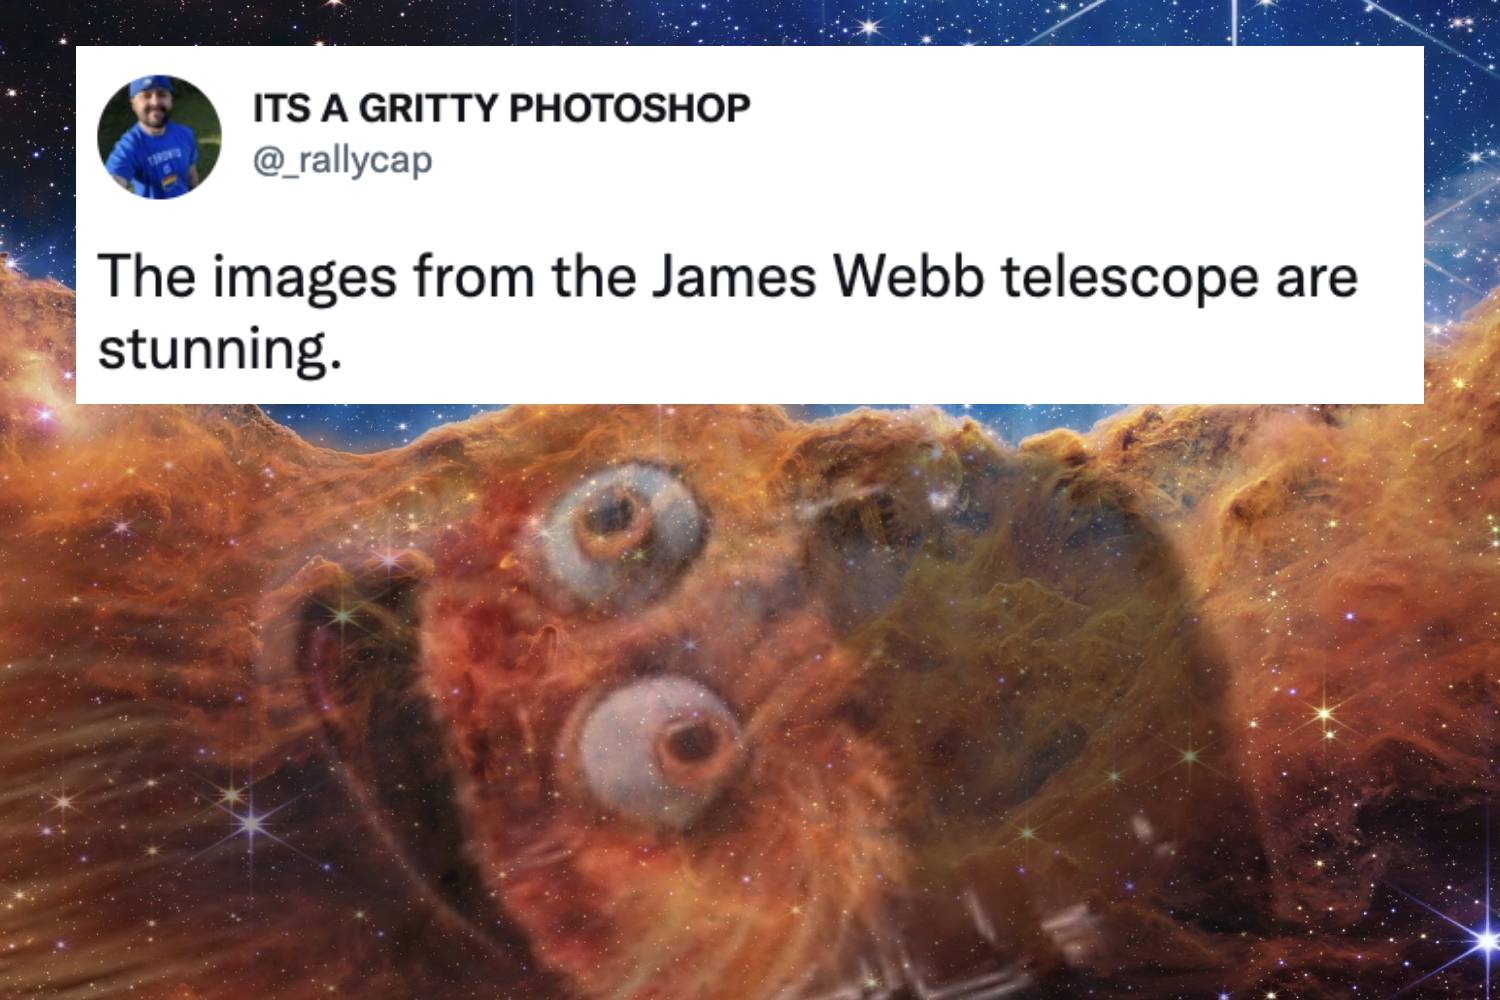 James Webb Telescope Memes - marine biology - Its A Gritty Photoshop The images from the James Webb telescope are stunning.